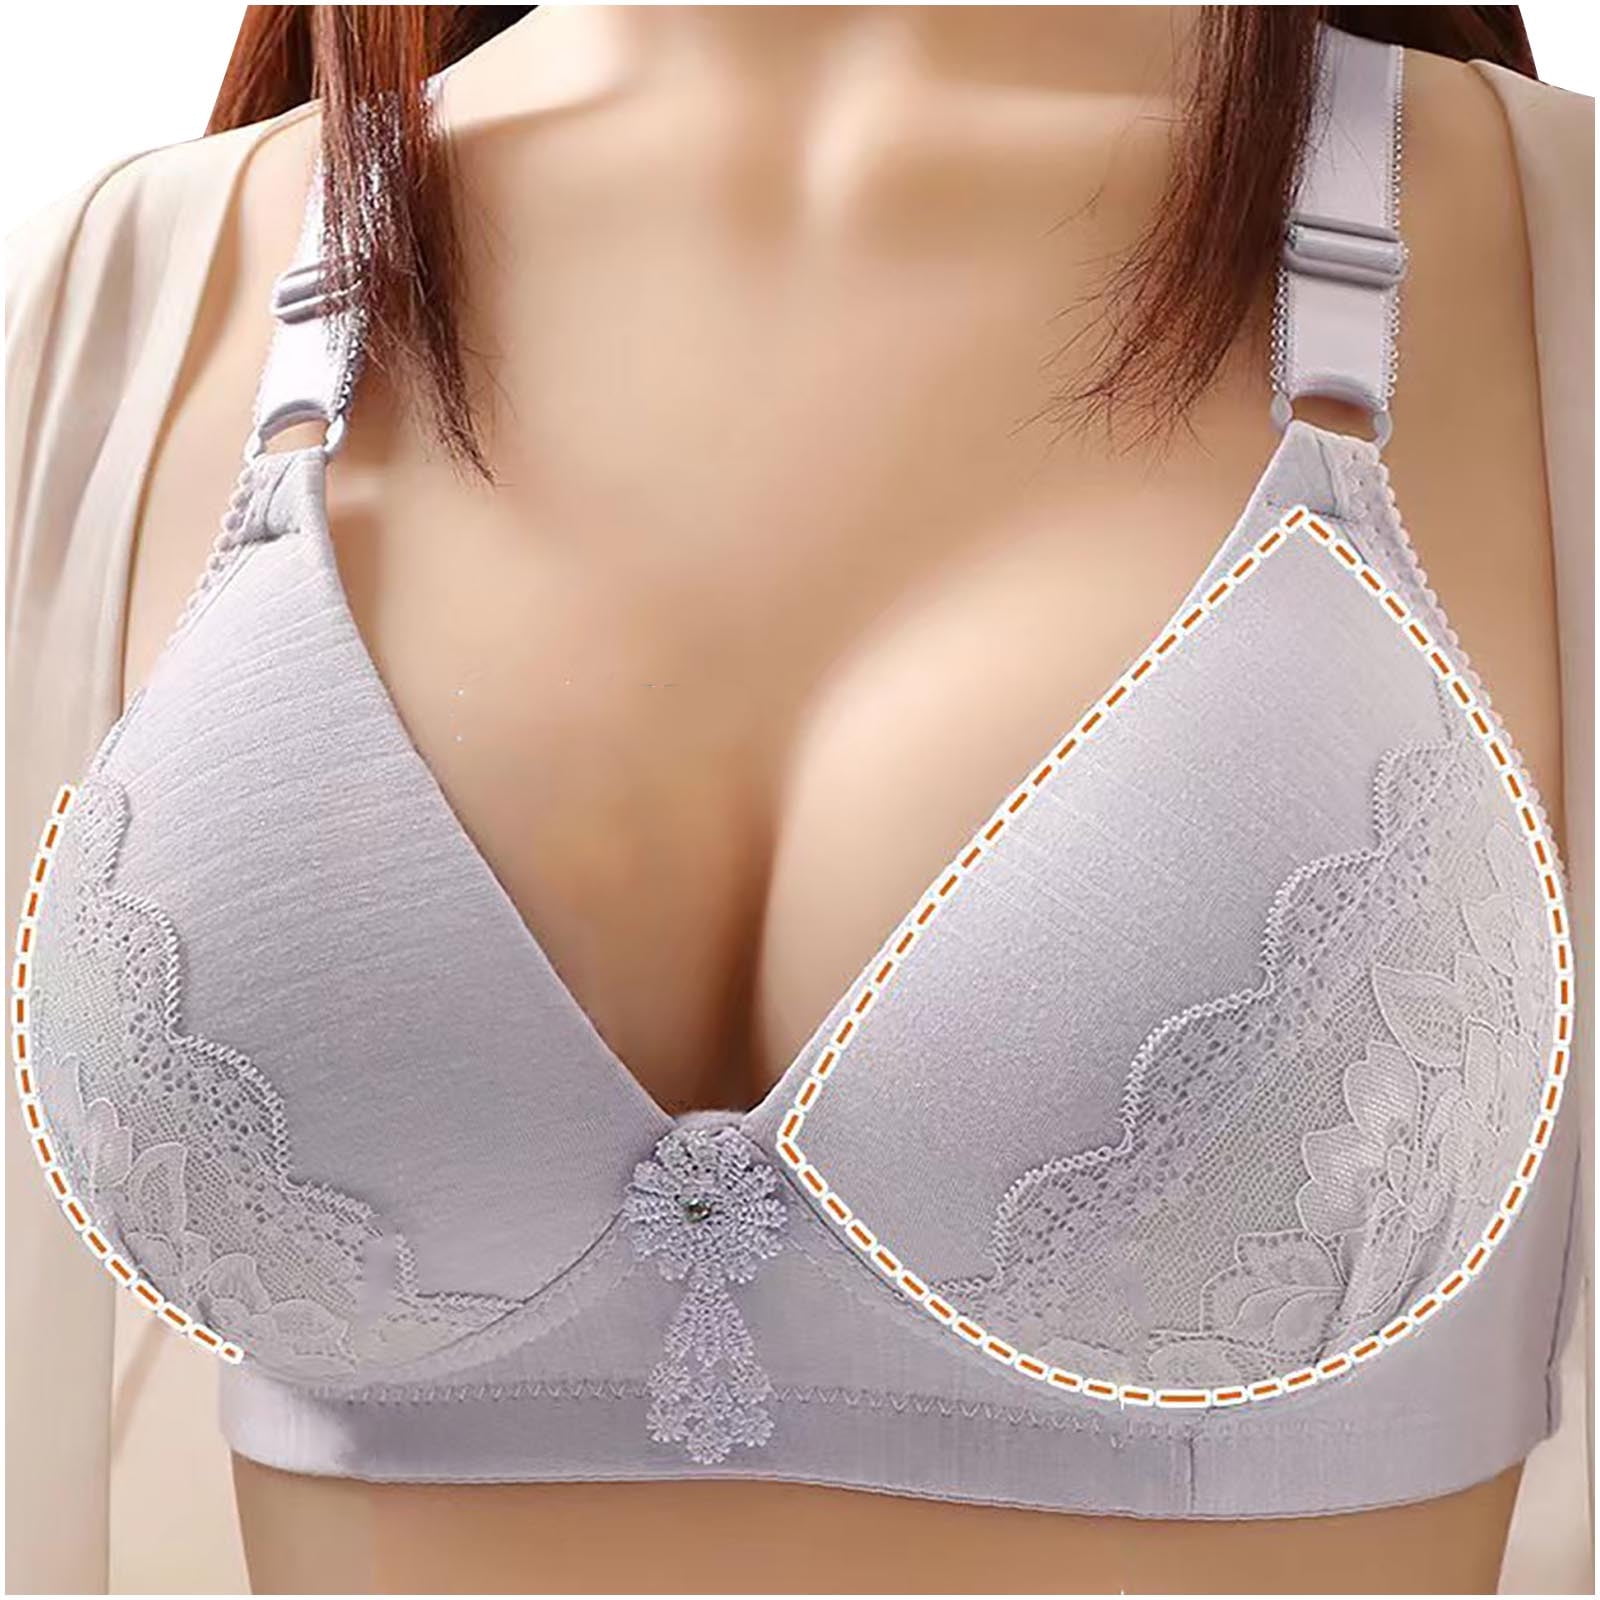 Xmarks Push up Bra for Big Busted Women - Wireless Push Up Bra,Bras for  Women No Underwire for Comfort,Push Up Bras for Women,Wireless Bra Full